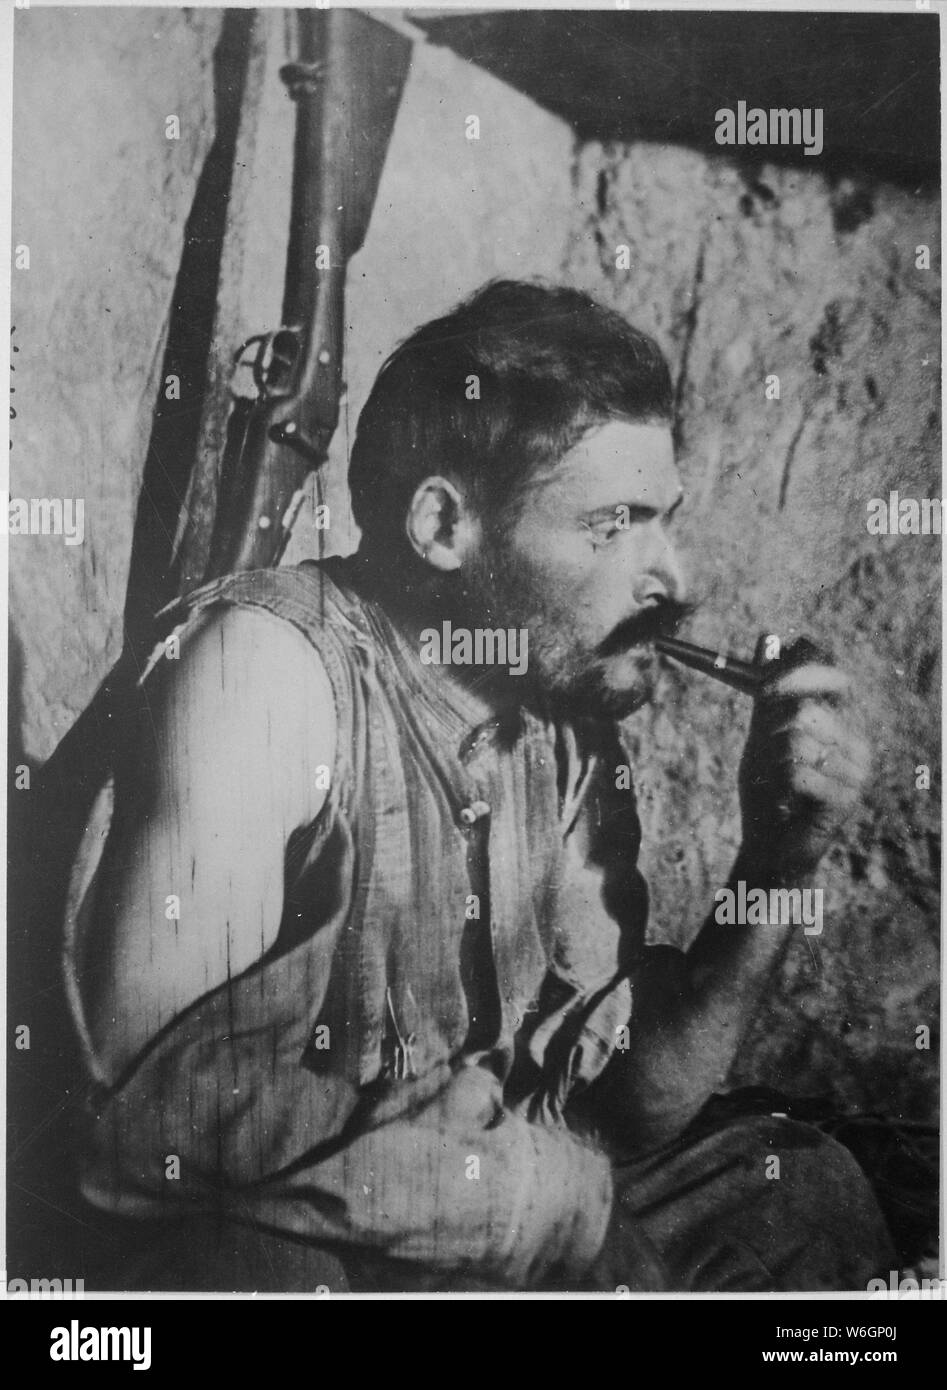 French soldier resting after battle. Underwood and Underwood., 1917 - 1919; General notes:  Use War and Conflict Number 646 when ordering a reproduction or requesting information about this image. Stock Photo